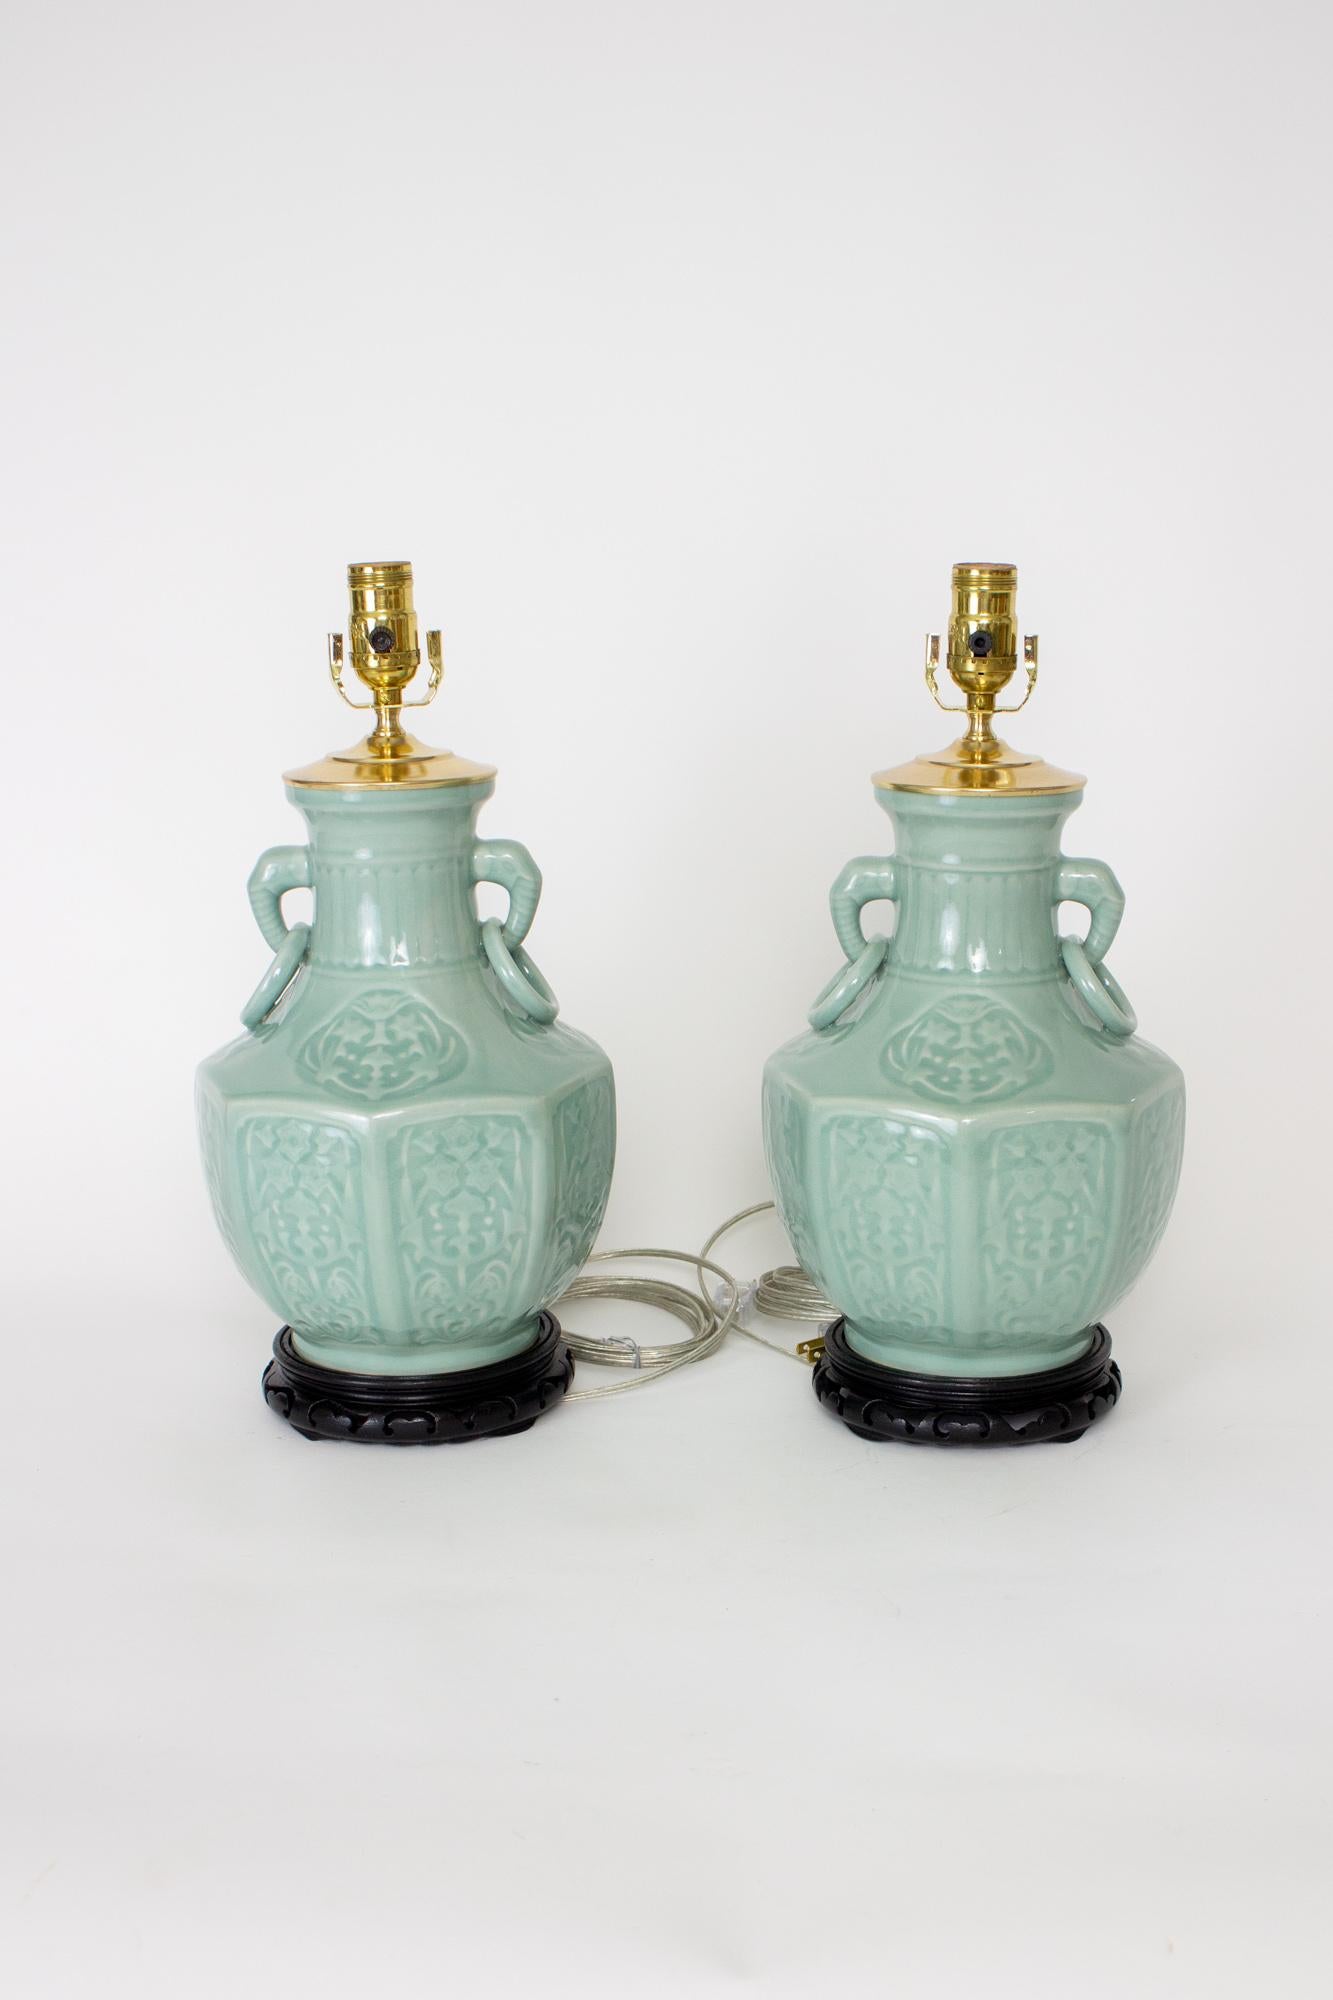 Custom Lamps made from 20th Century Chinese vases. Two elephant handles with rings. Octagonal shape with ornamented panels. Excellent condition. All brass hardware and carved wooden base. Single standard base socket. Silver wire. Newly wired with